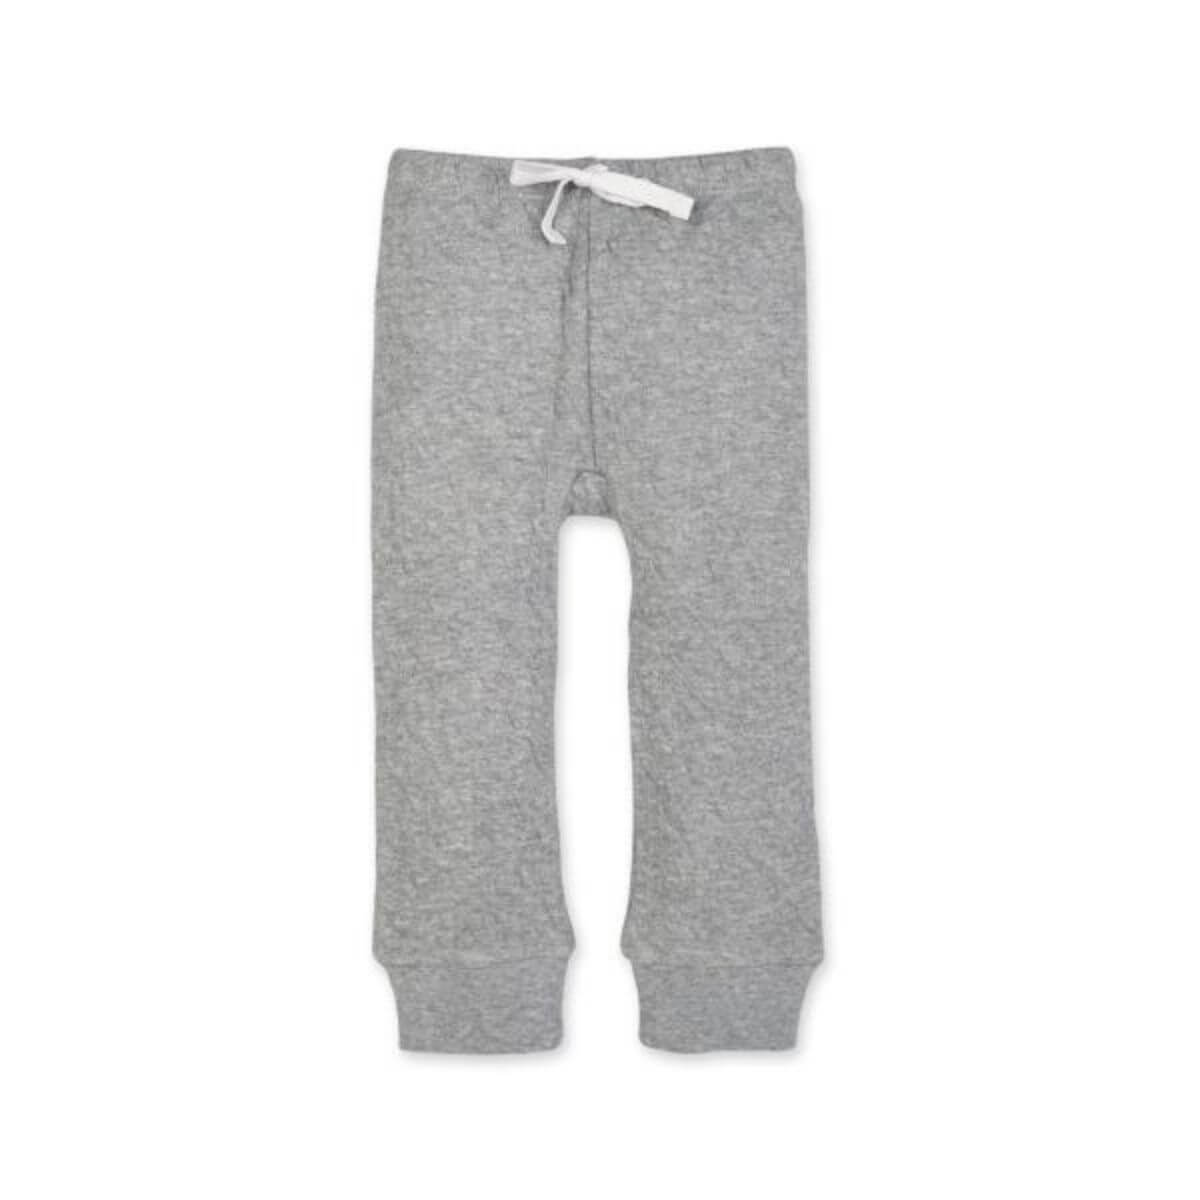 Organic Cotton Quilted Baby Pants - Gray